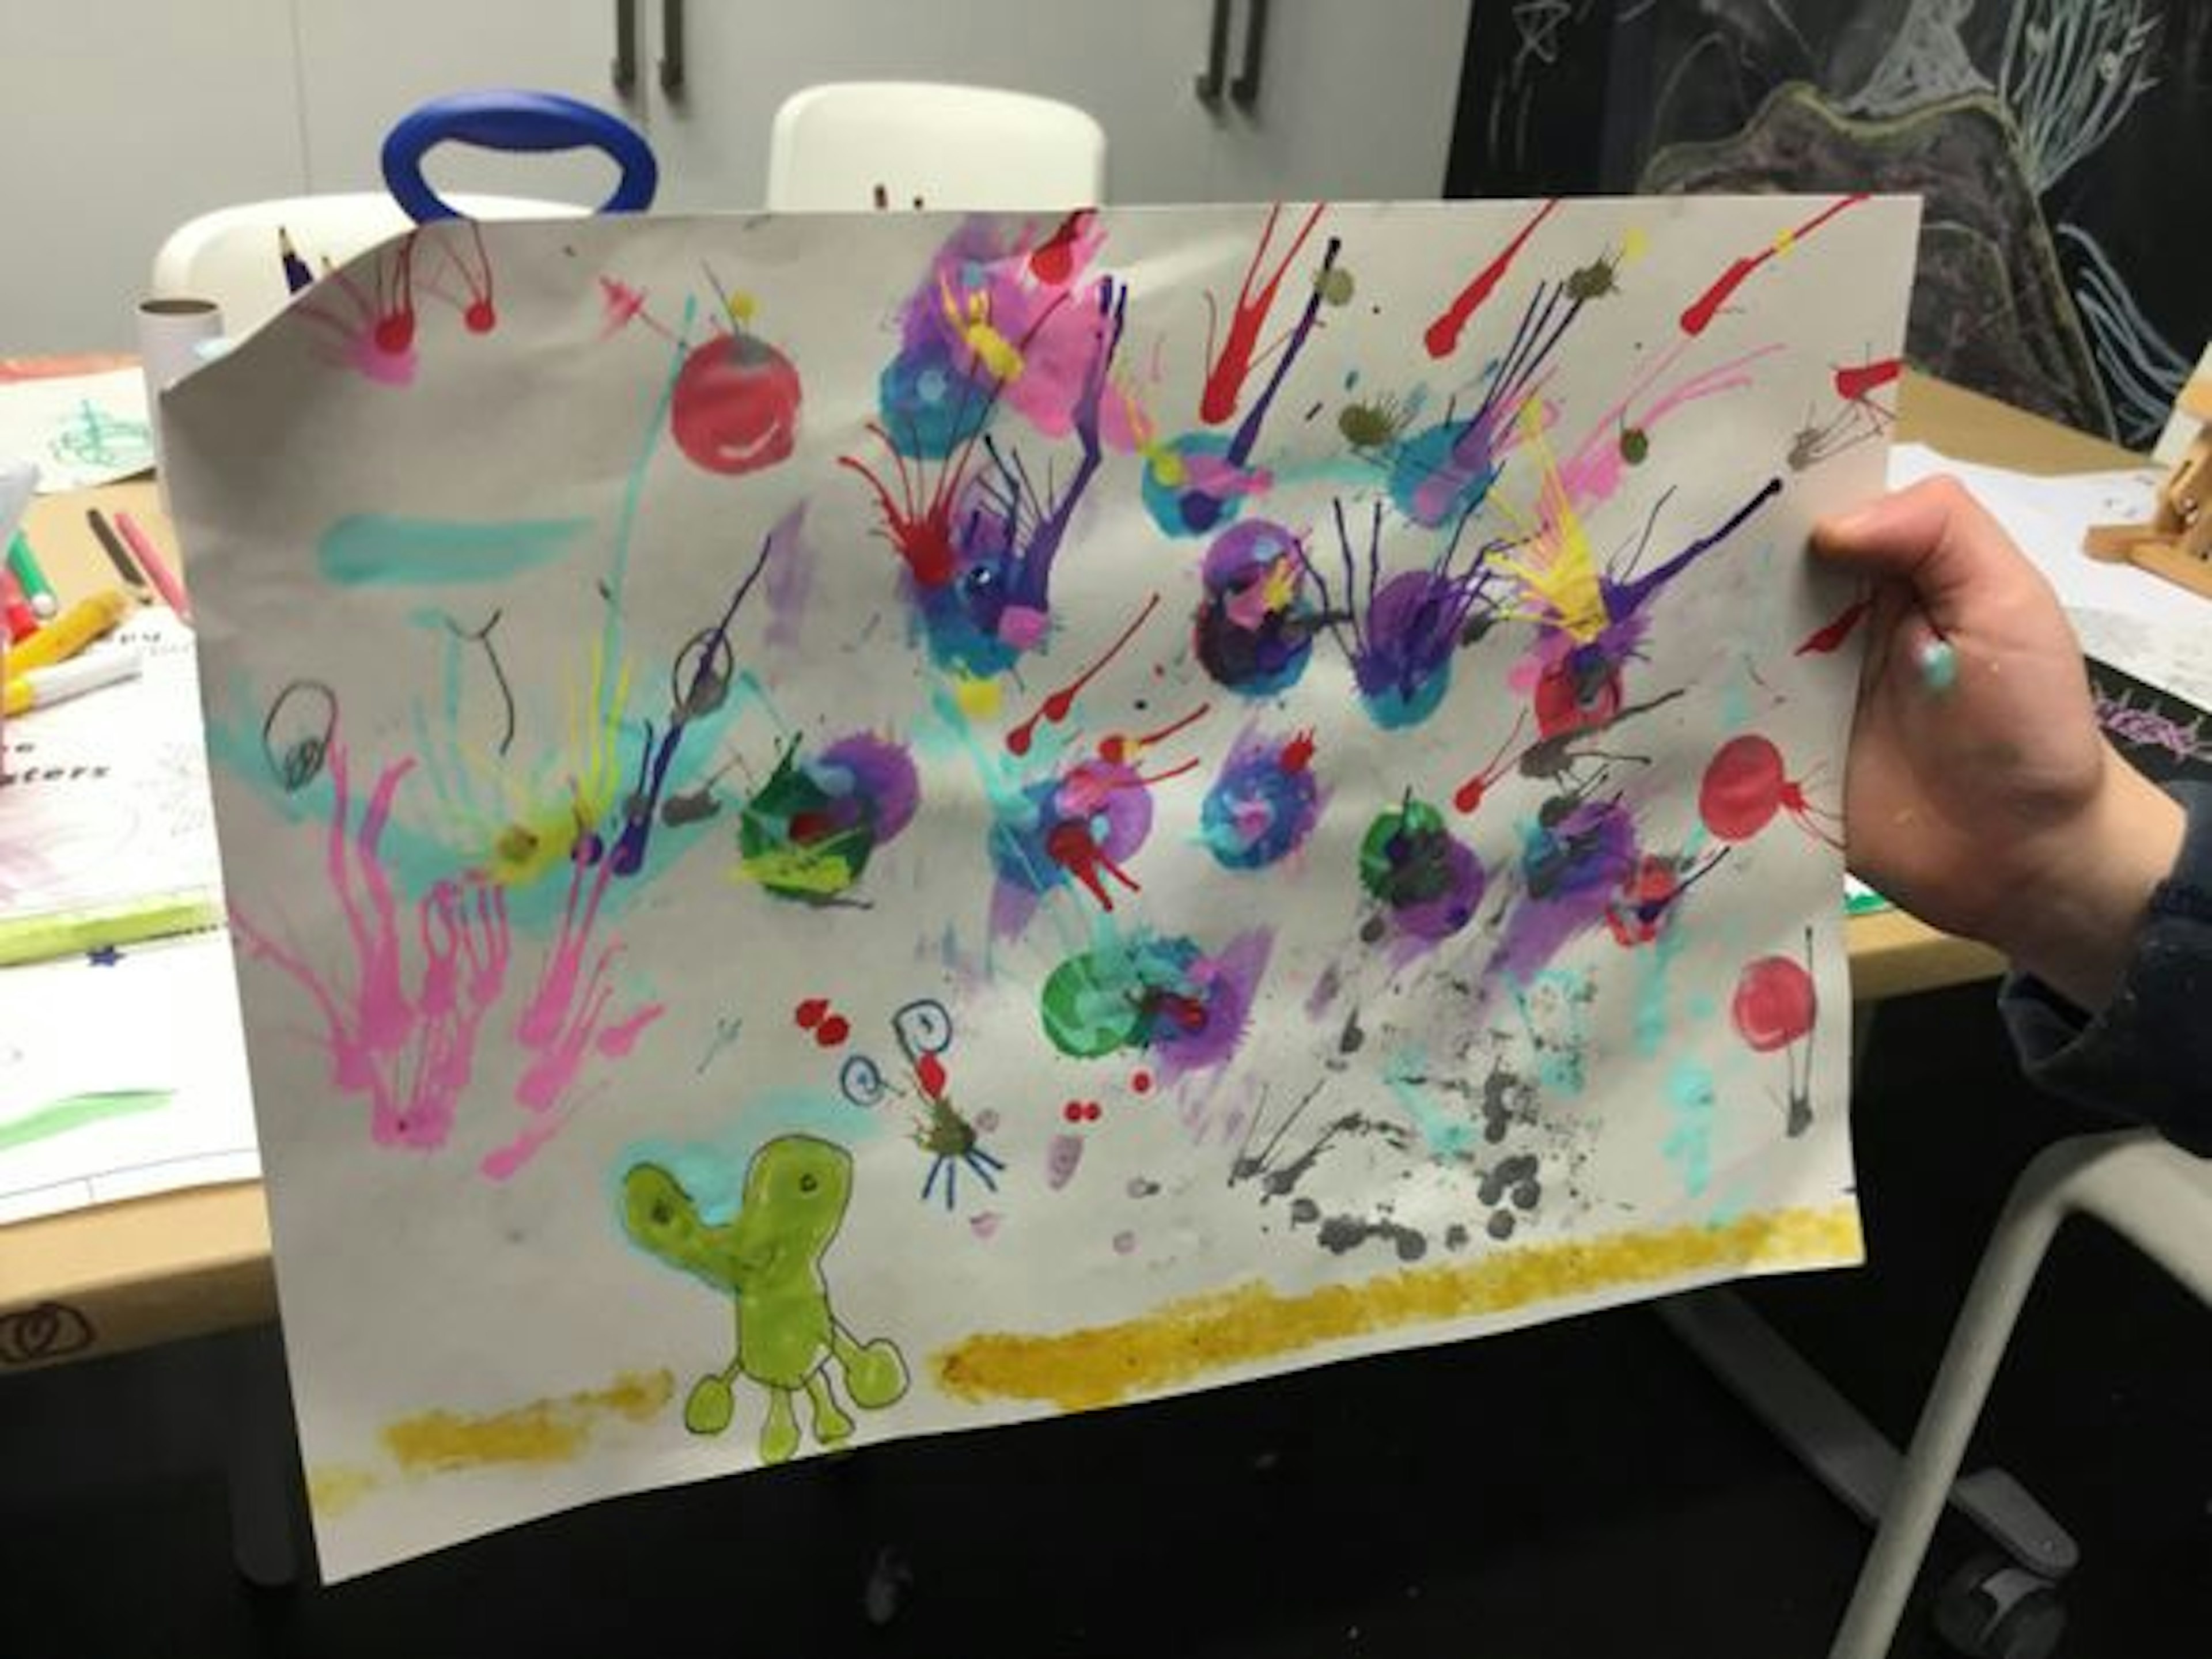 To draw this you need to make a frog and put fireworks and aliens there too. Silver paint works great to draw explosions.